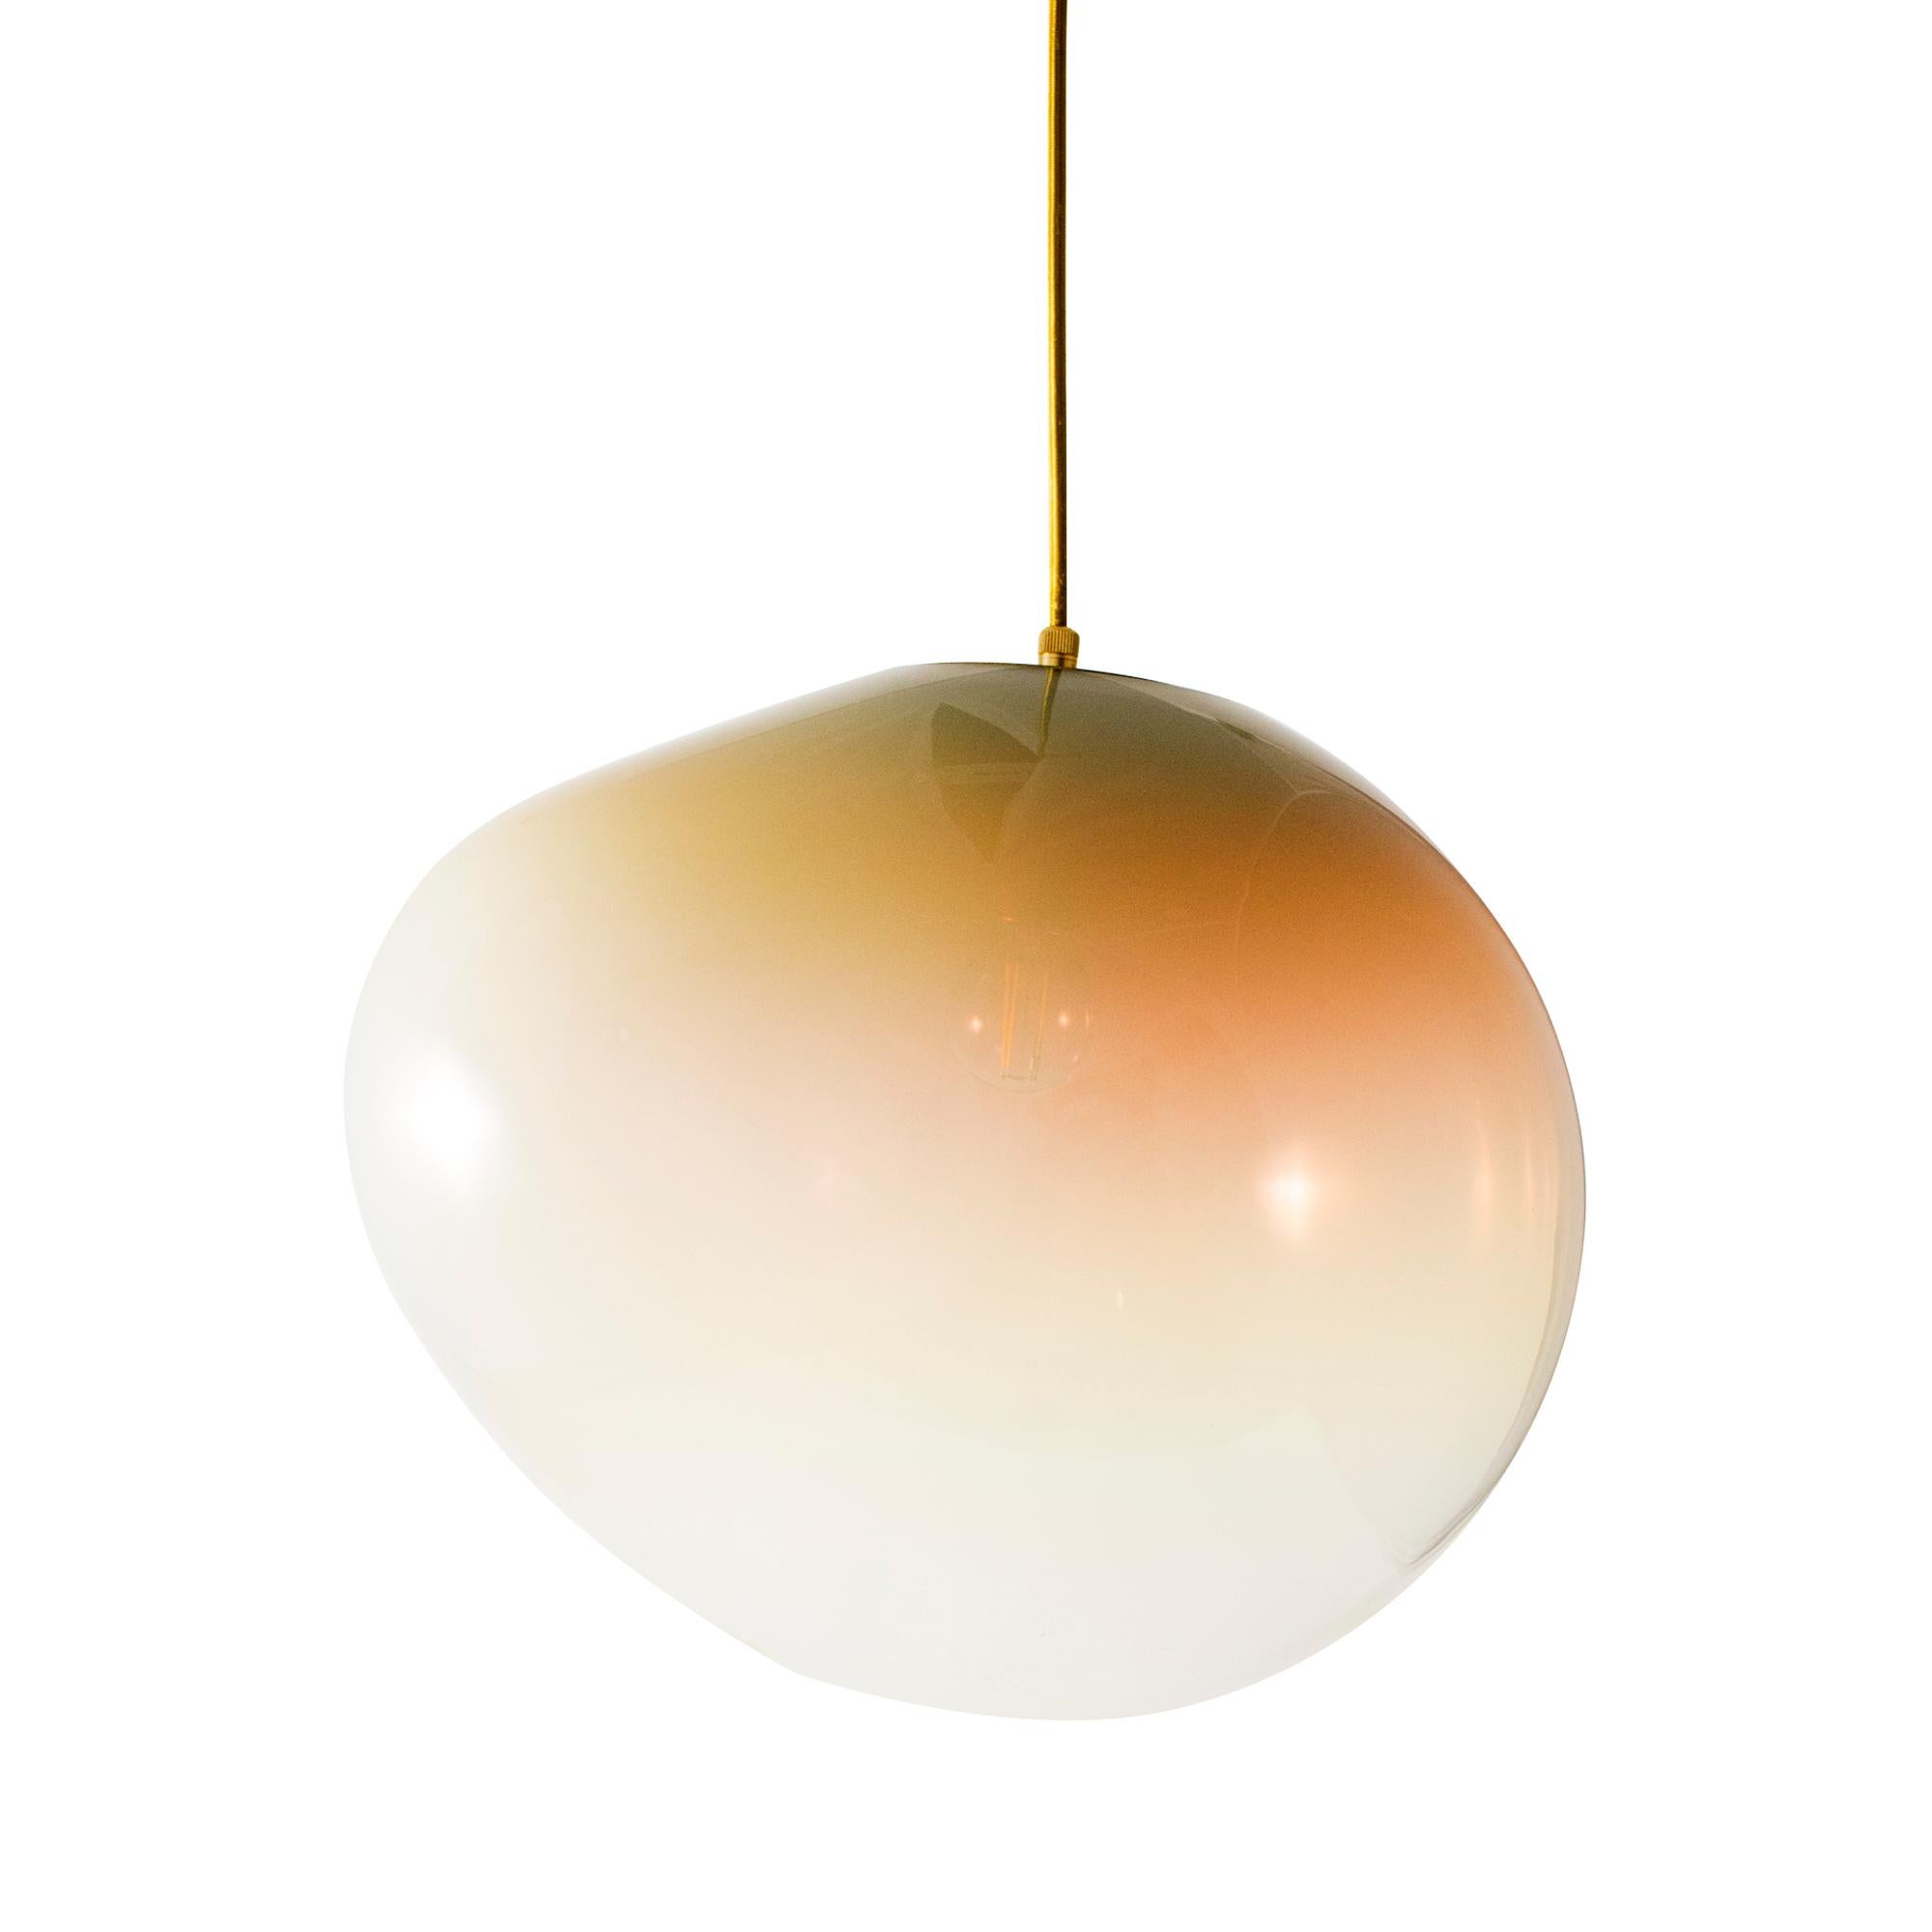 Sirius XL pendant by ELOA.
No UL listed 
Material: LED bulb, glass.
Dimensions: D 38 x W 43 x H 38 cm.
Also available in different colours and dimensions.

All our lamps can be wired according to each country. If sold to the USA it will be wired for